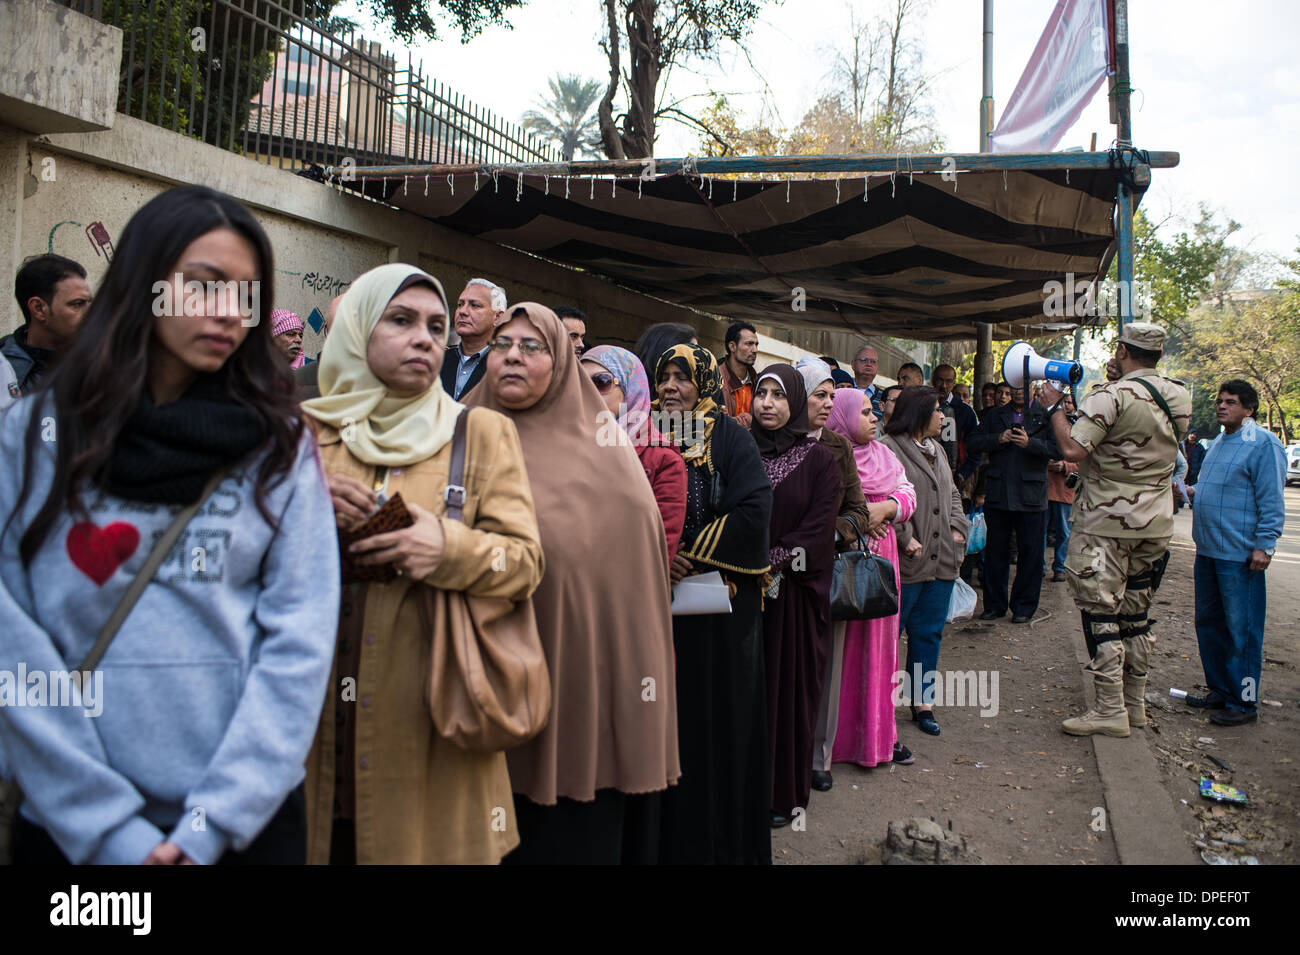 Cairo, Egypt. 14th Jan, 2014. People wait for entering a balloting station in Maadi district, Cairo, capital of Egypt, on Jan.14, 2014. Egyptians started casting their votes on Tuesday on the country's new draft constitution, which is widely seen as a milestone during Egypt's political transition after Islamist president Mohamed Morsi was ousted last July. Credit:  Pan Chaoyue/Xinhua/Alamy Live News Stock Photo